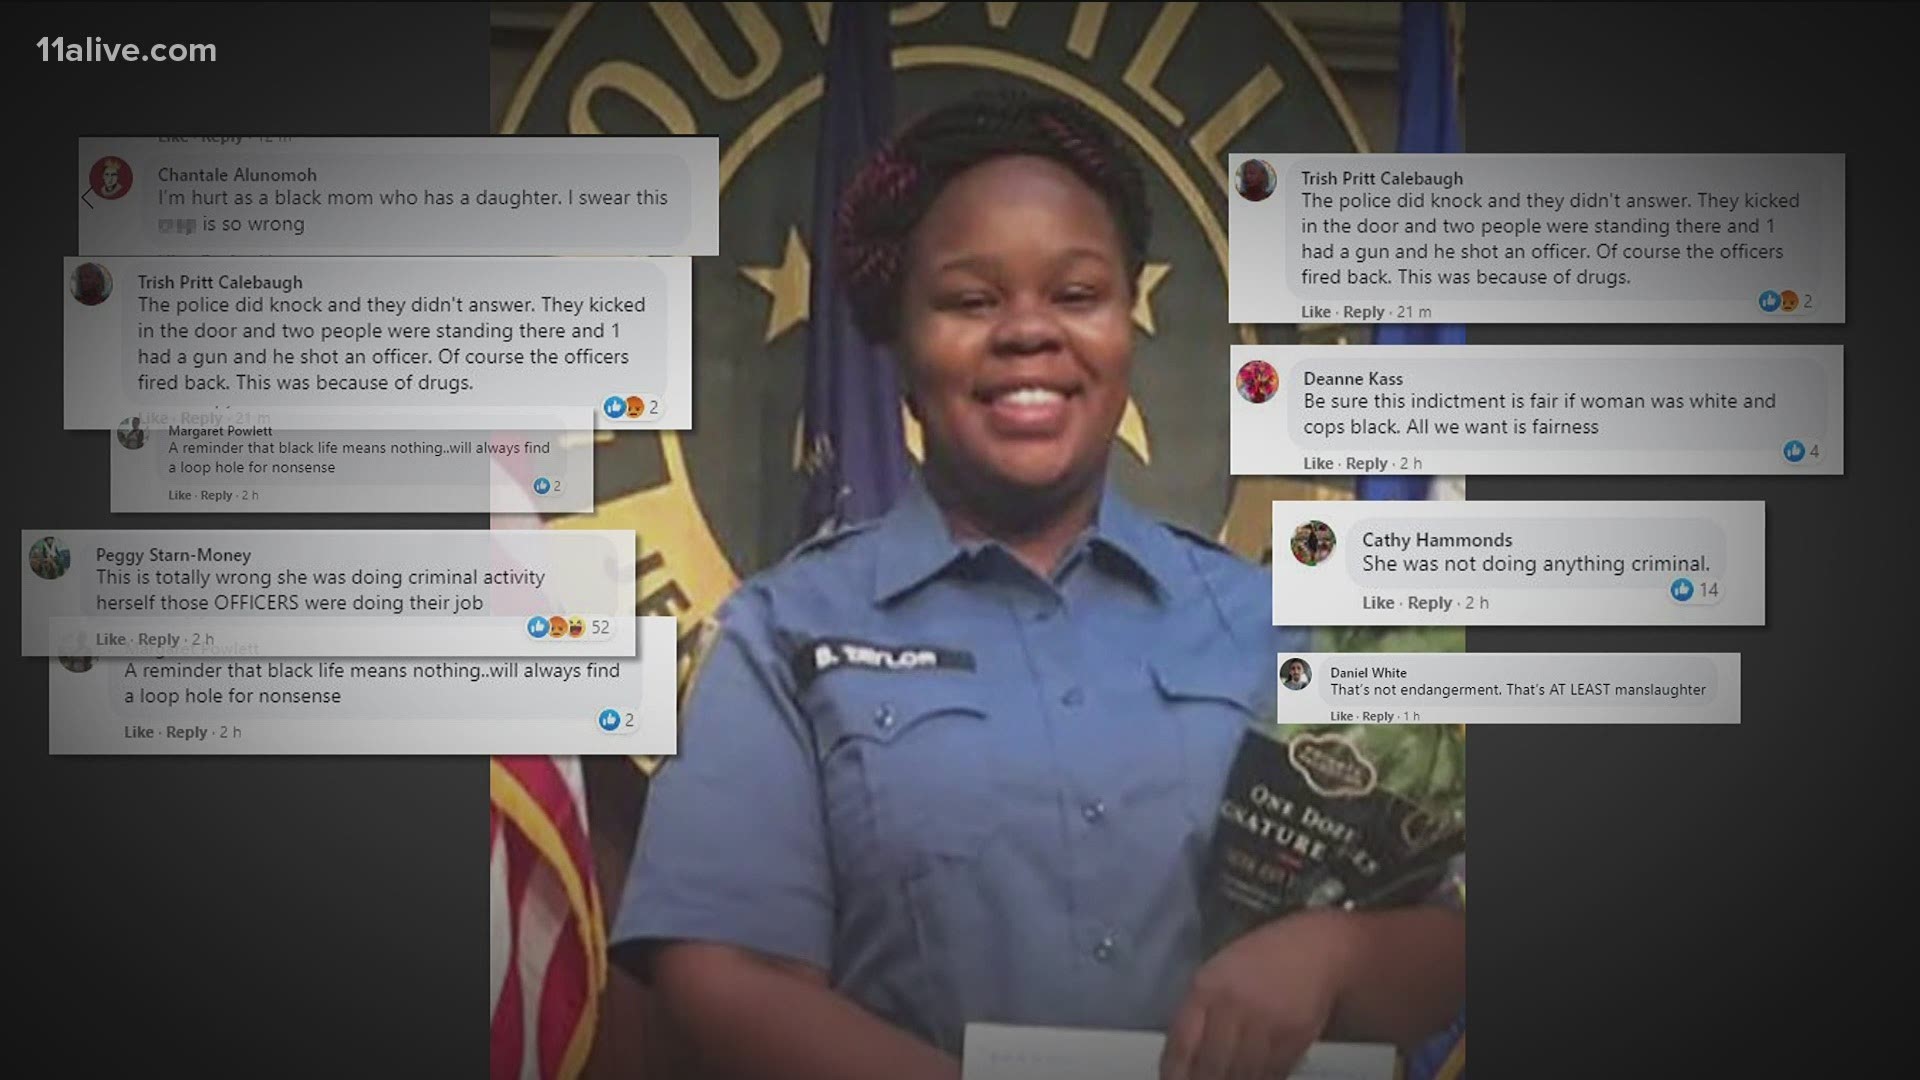 A Kentucky grand jury announced charges against a former Louisville police officer in the Breonna Taylor case, but the charges were not for her death.